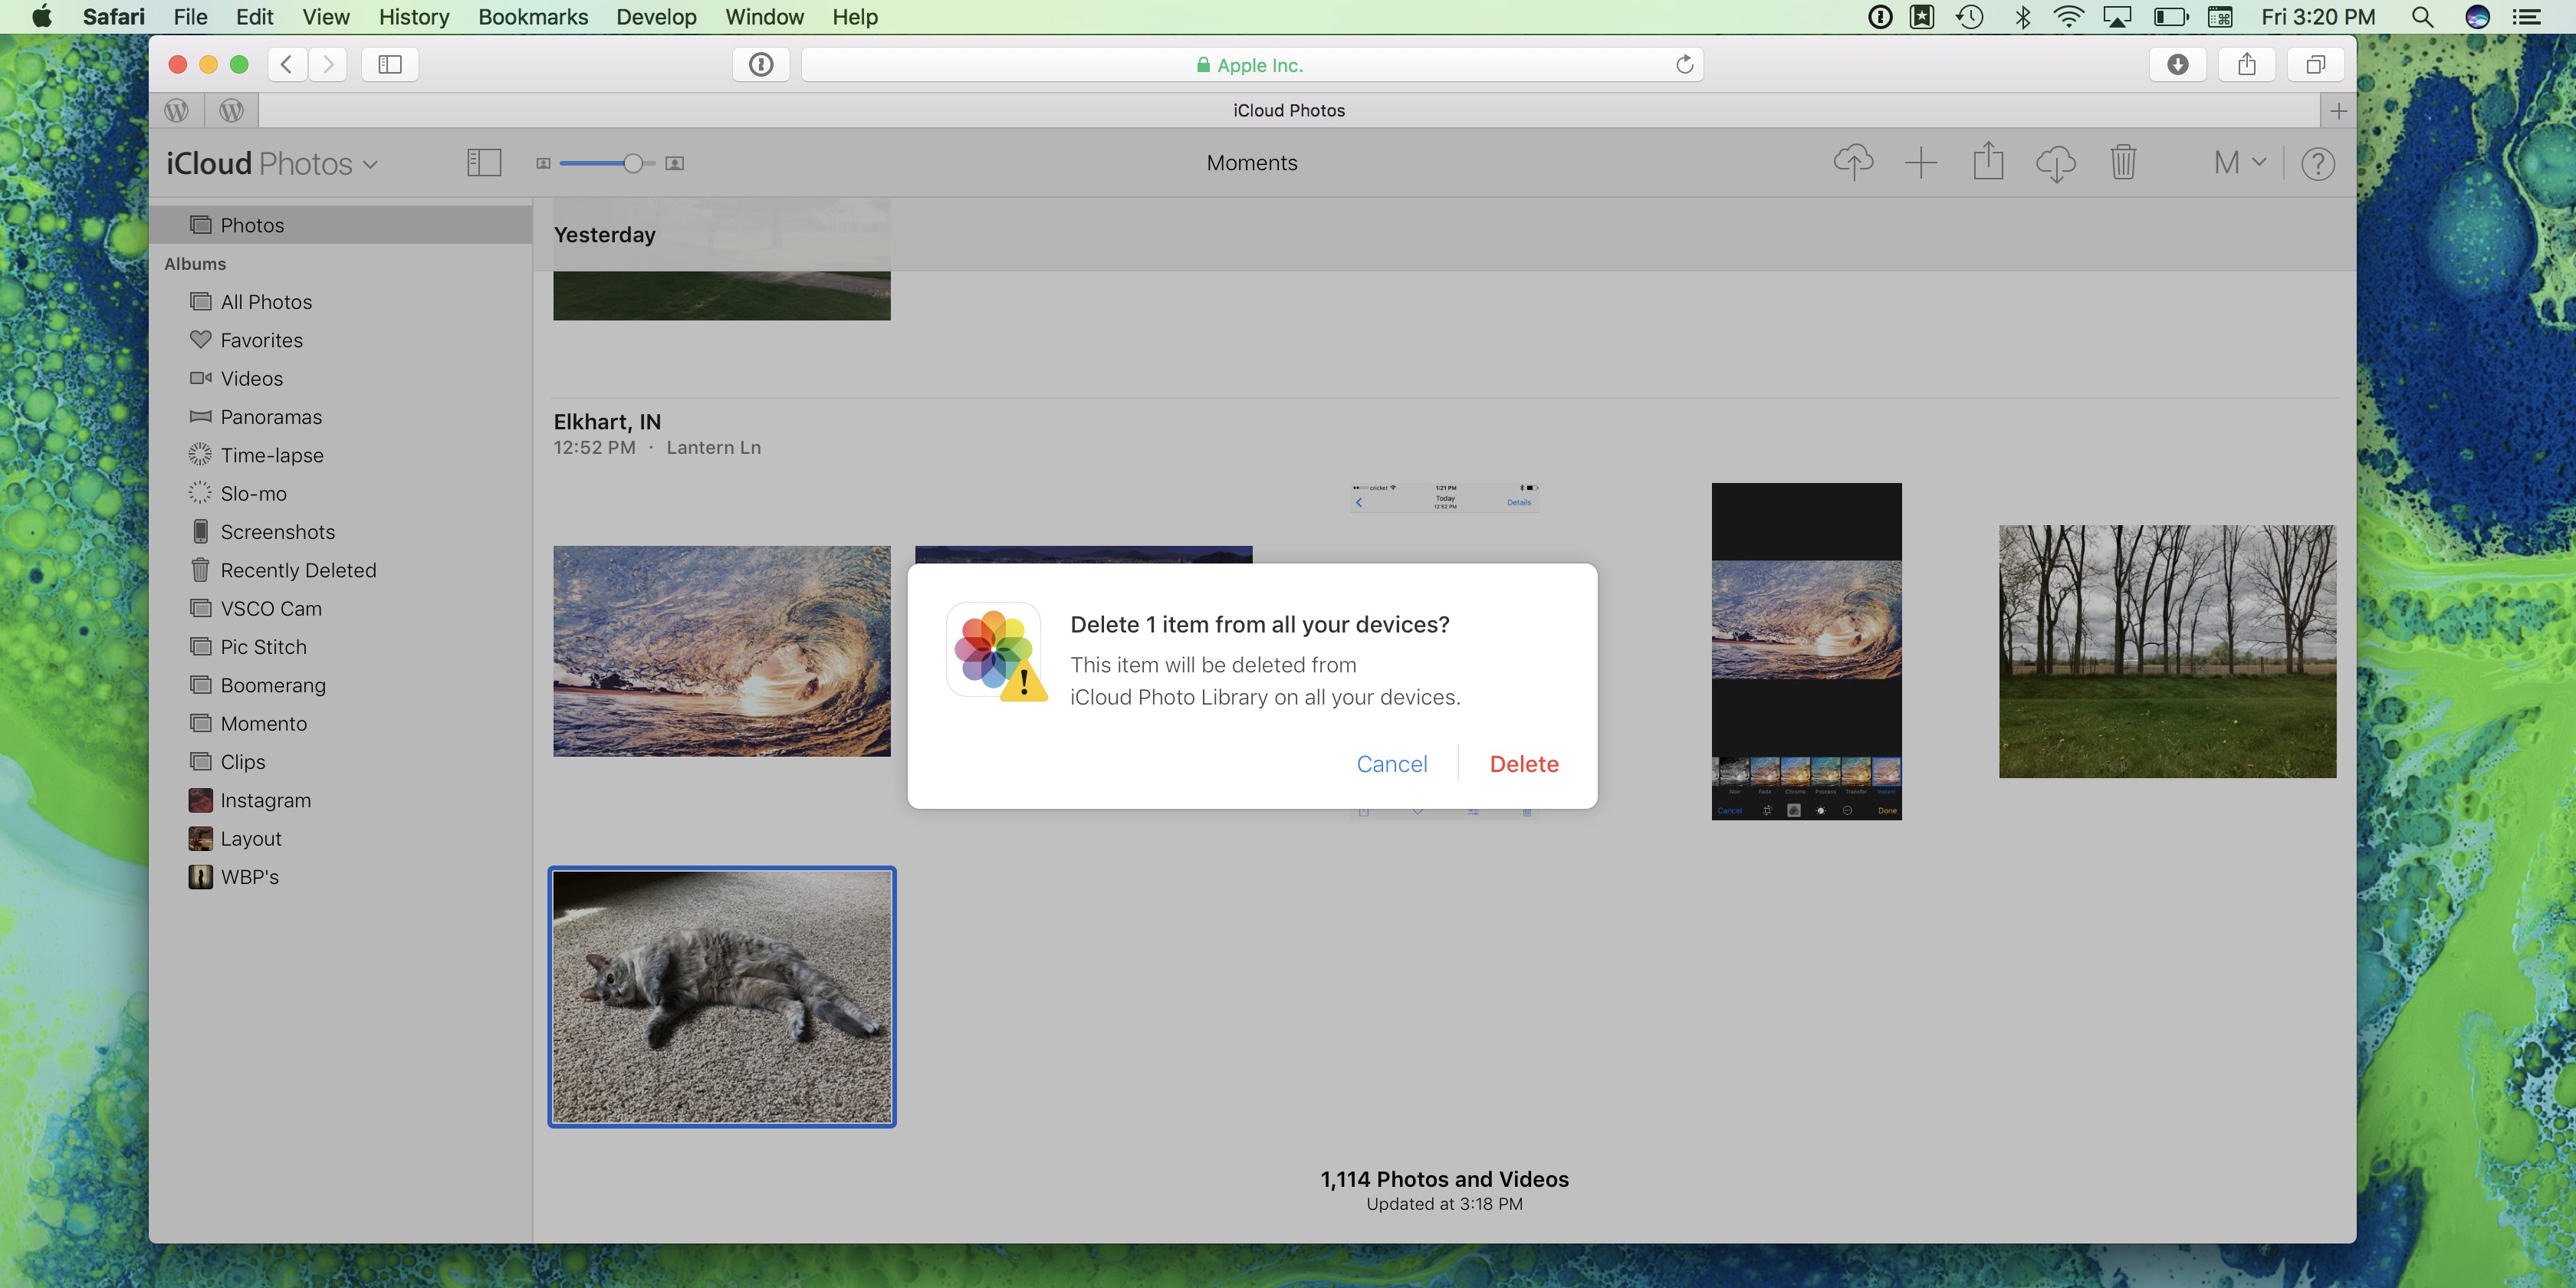 Image showing delete warning in Photos on iCloud.com